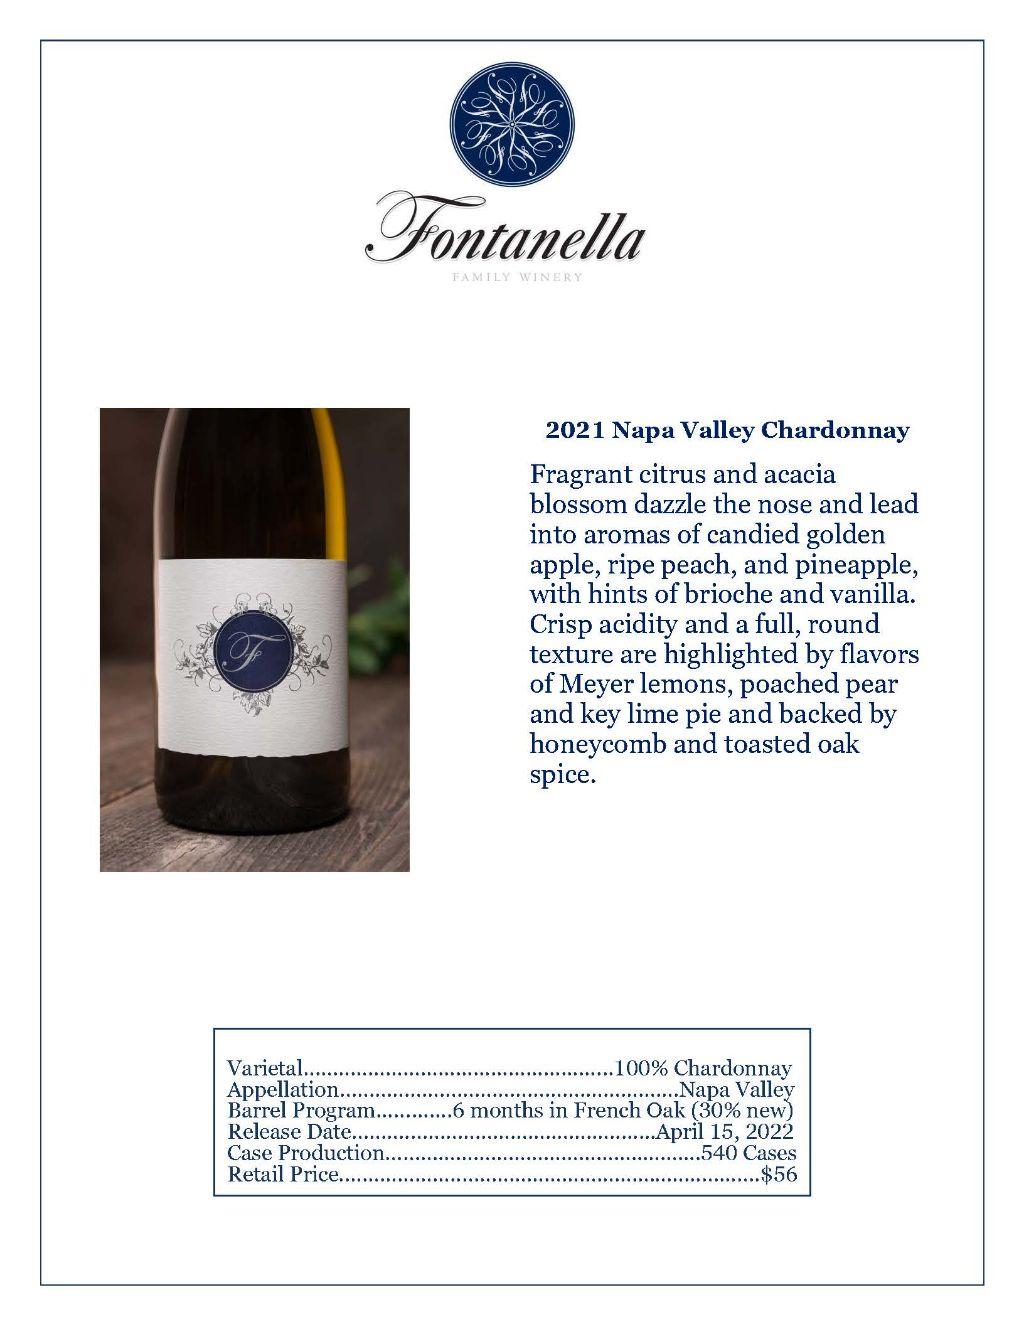 Fontanella Family Winery 2021 Chardonnay and 2021 Zinfandel and tasting for six